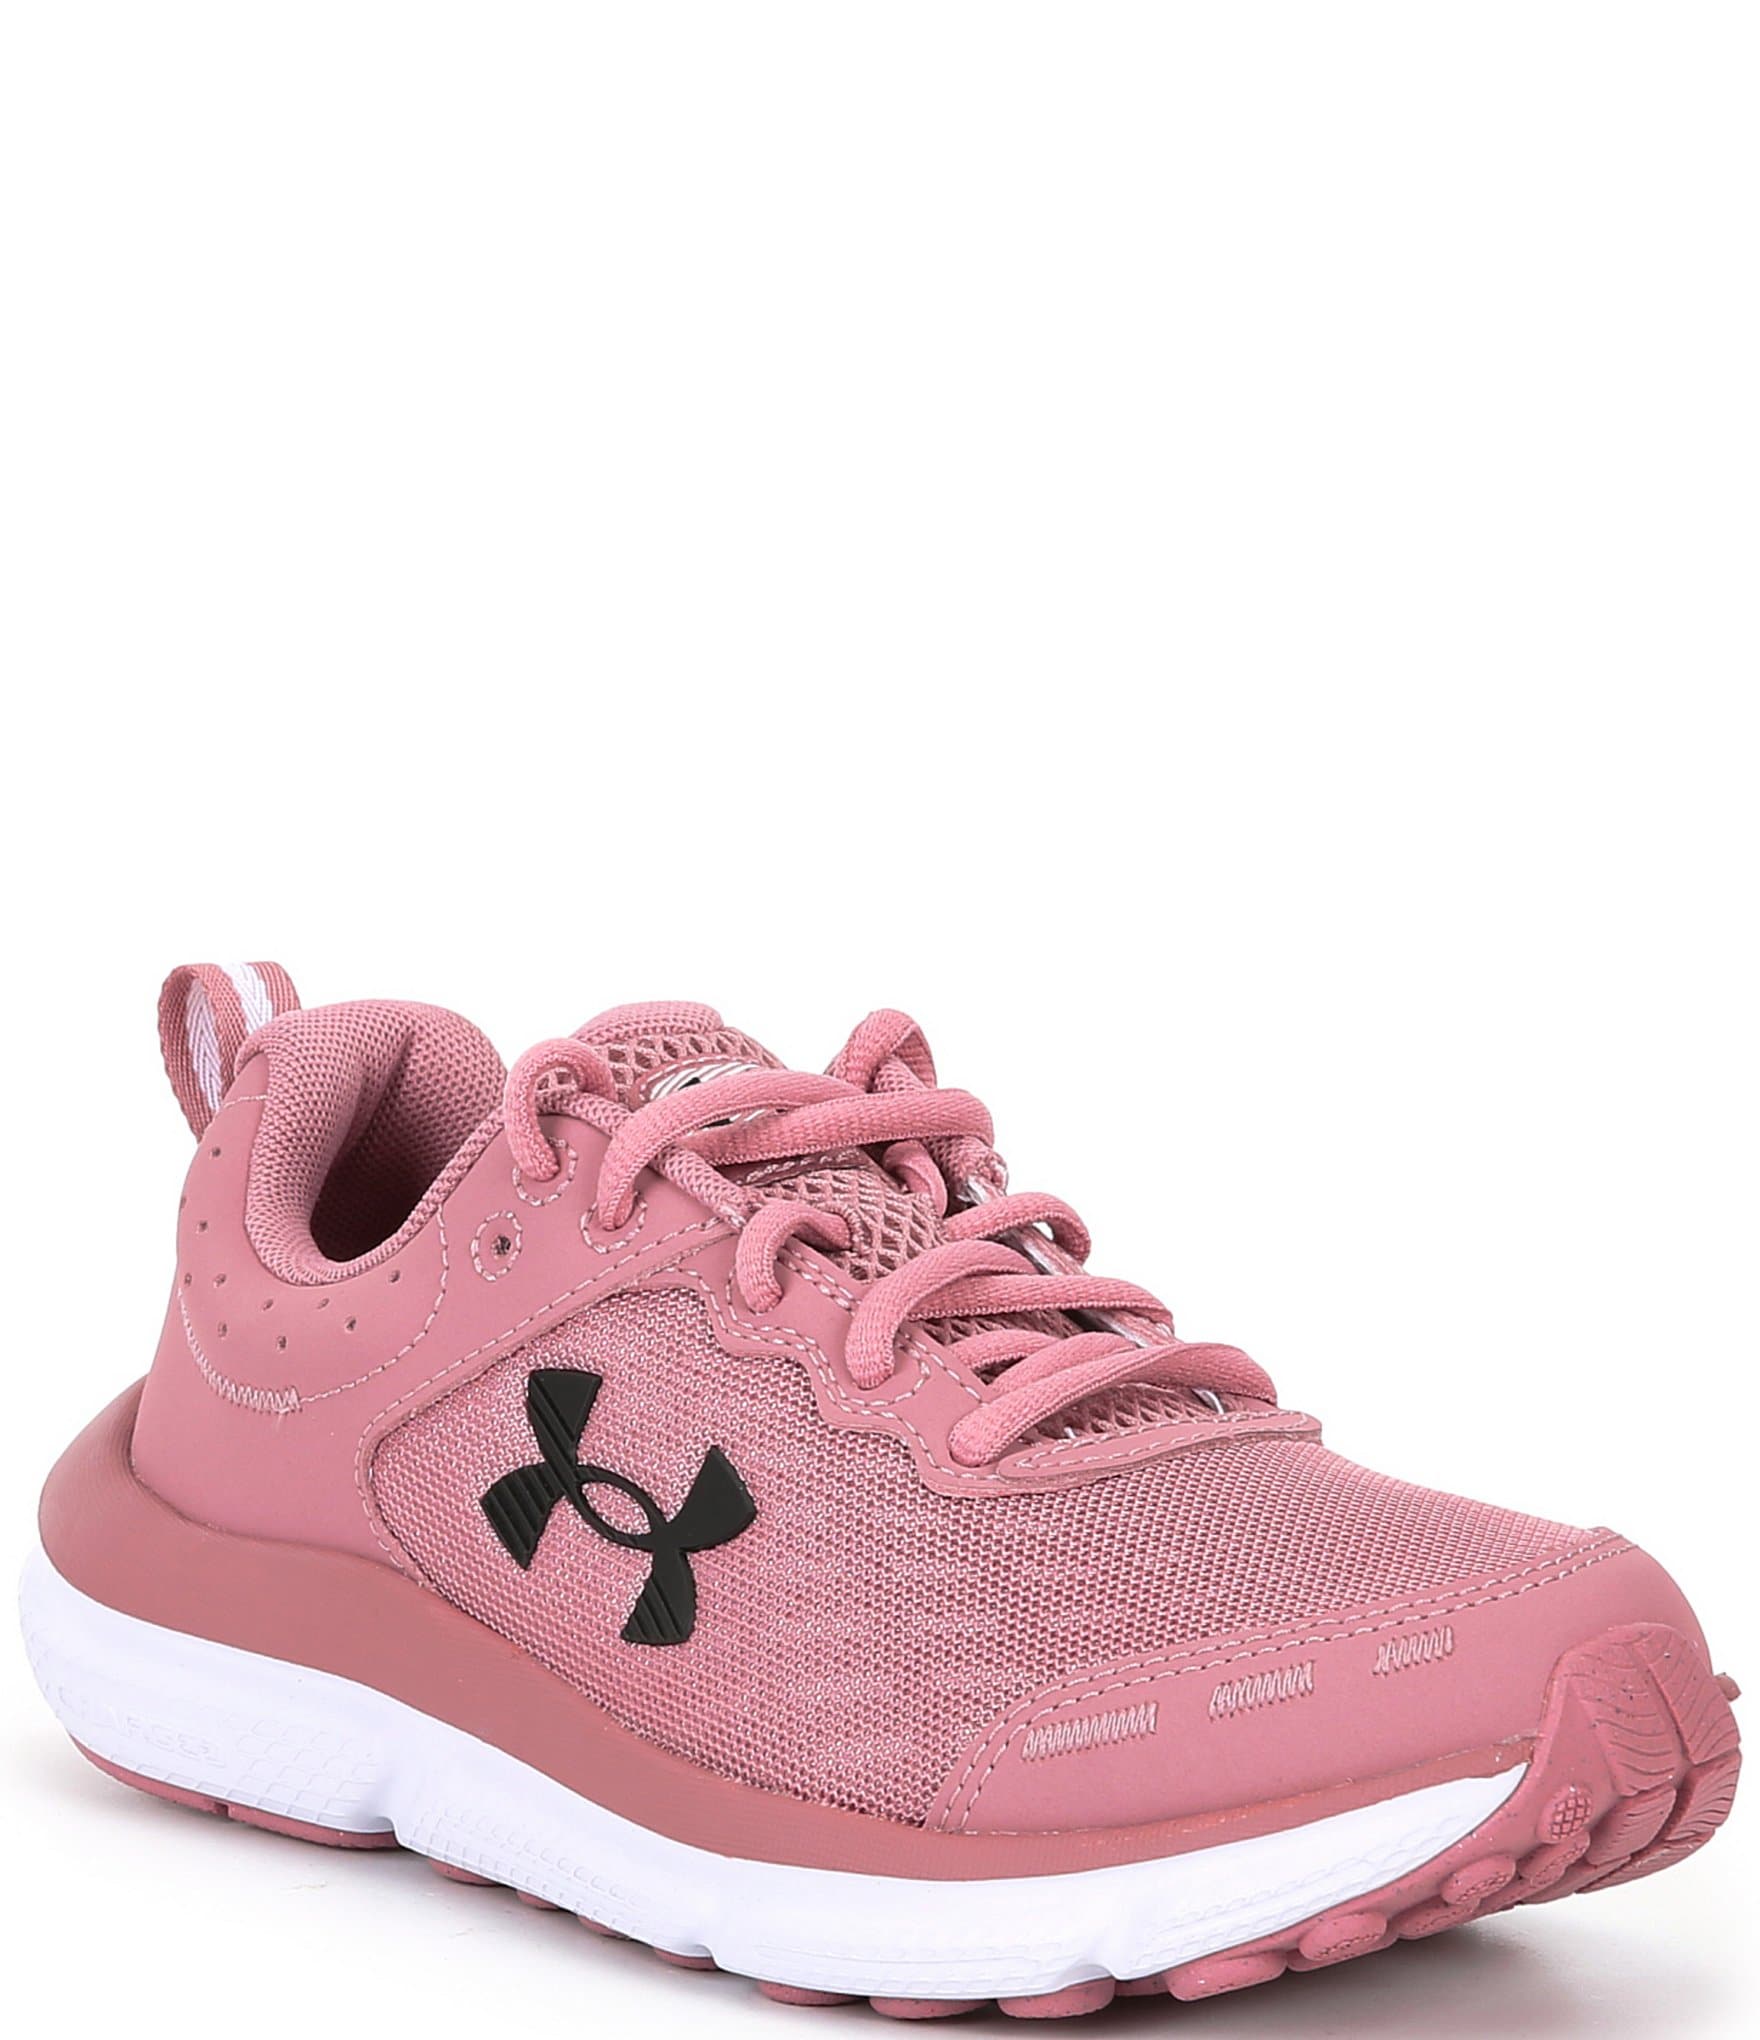 Under Armour Shoes Kenya at the Best Prices